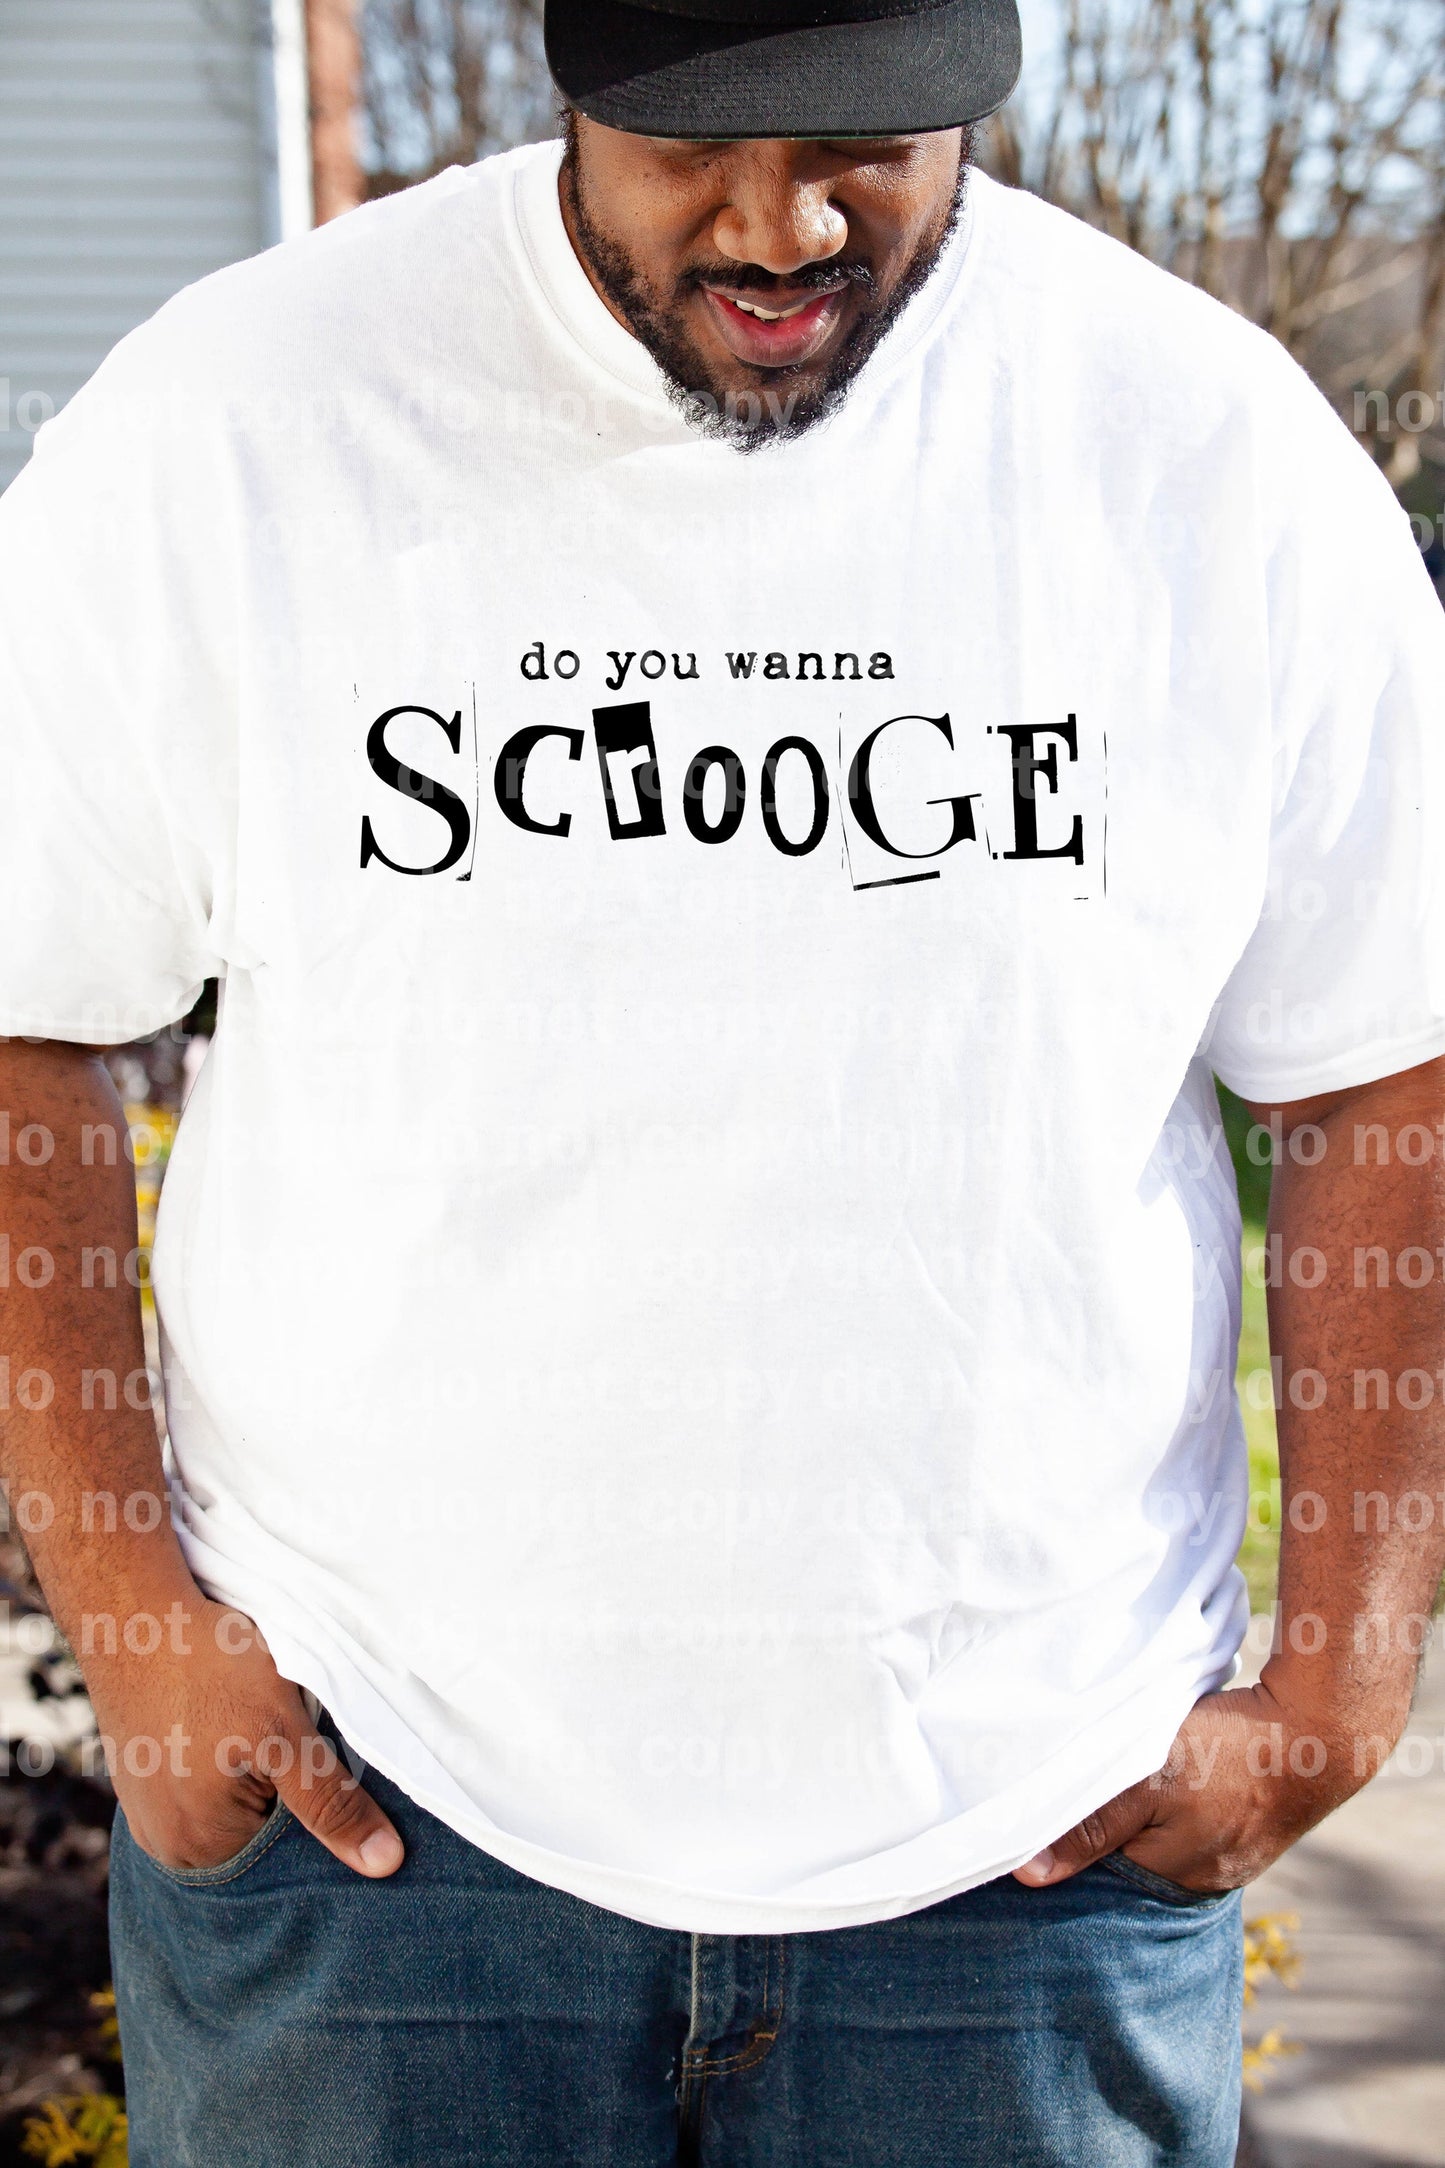 Do You Wanna Scrooge Dream Print or Sublimation Print